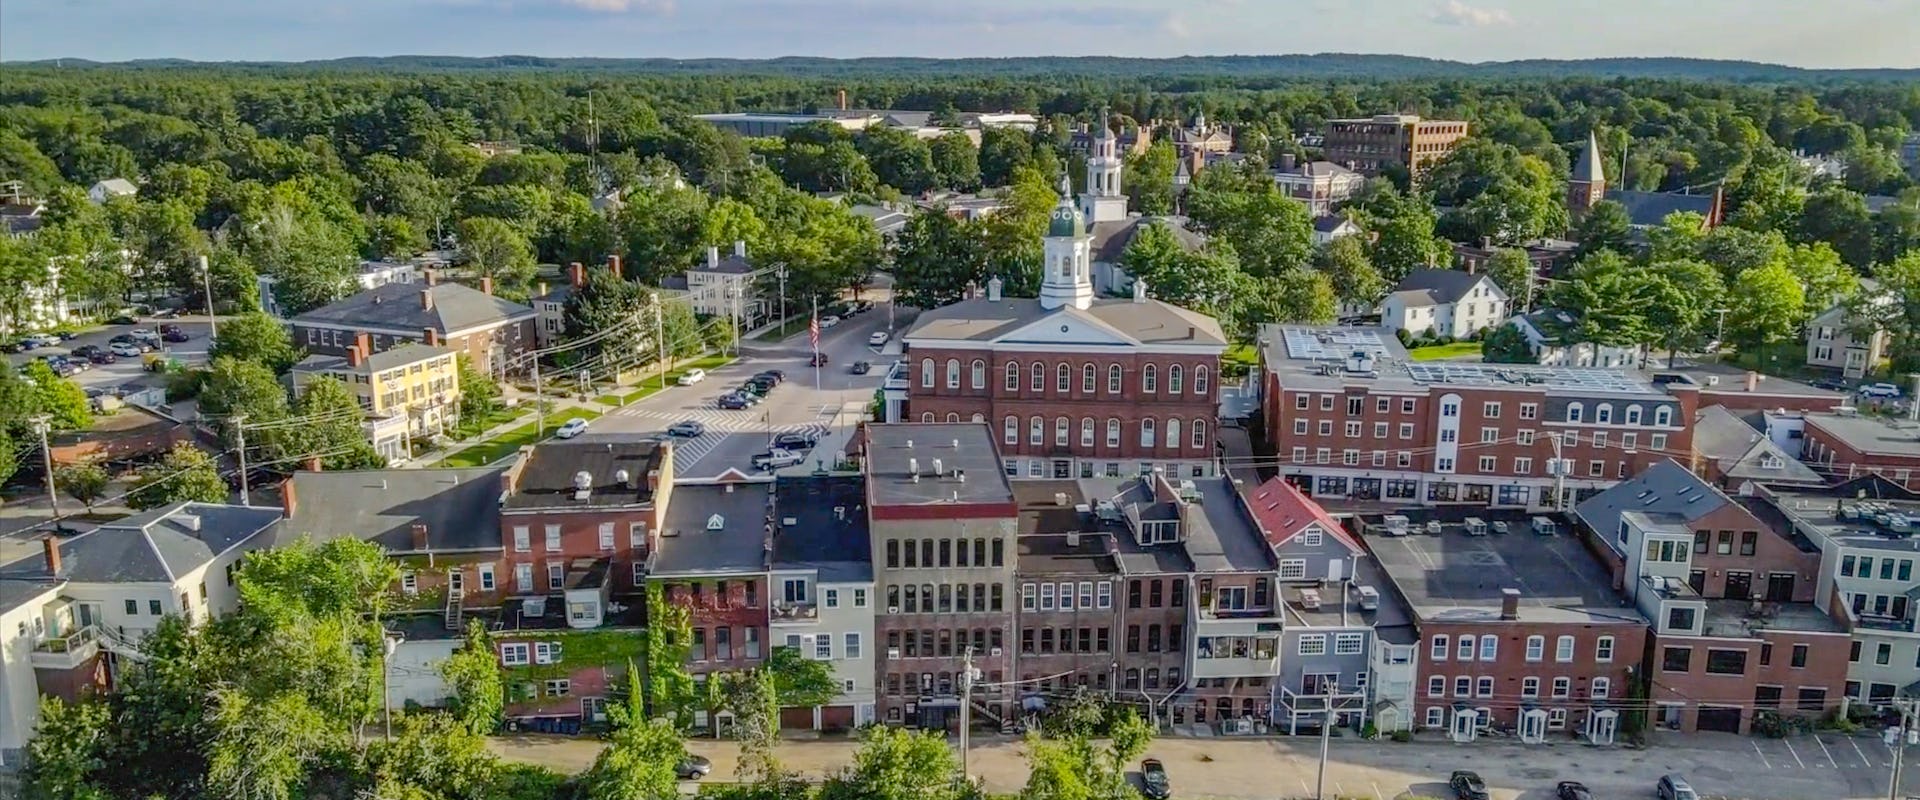 exeter downtown drone-small.jpg